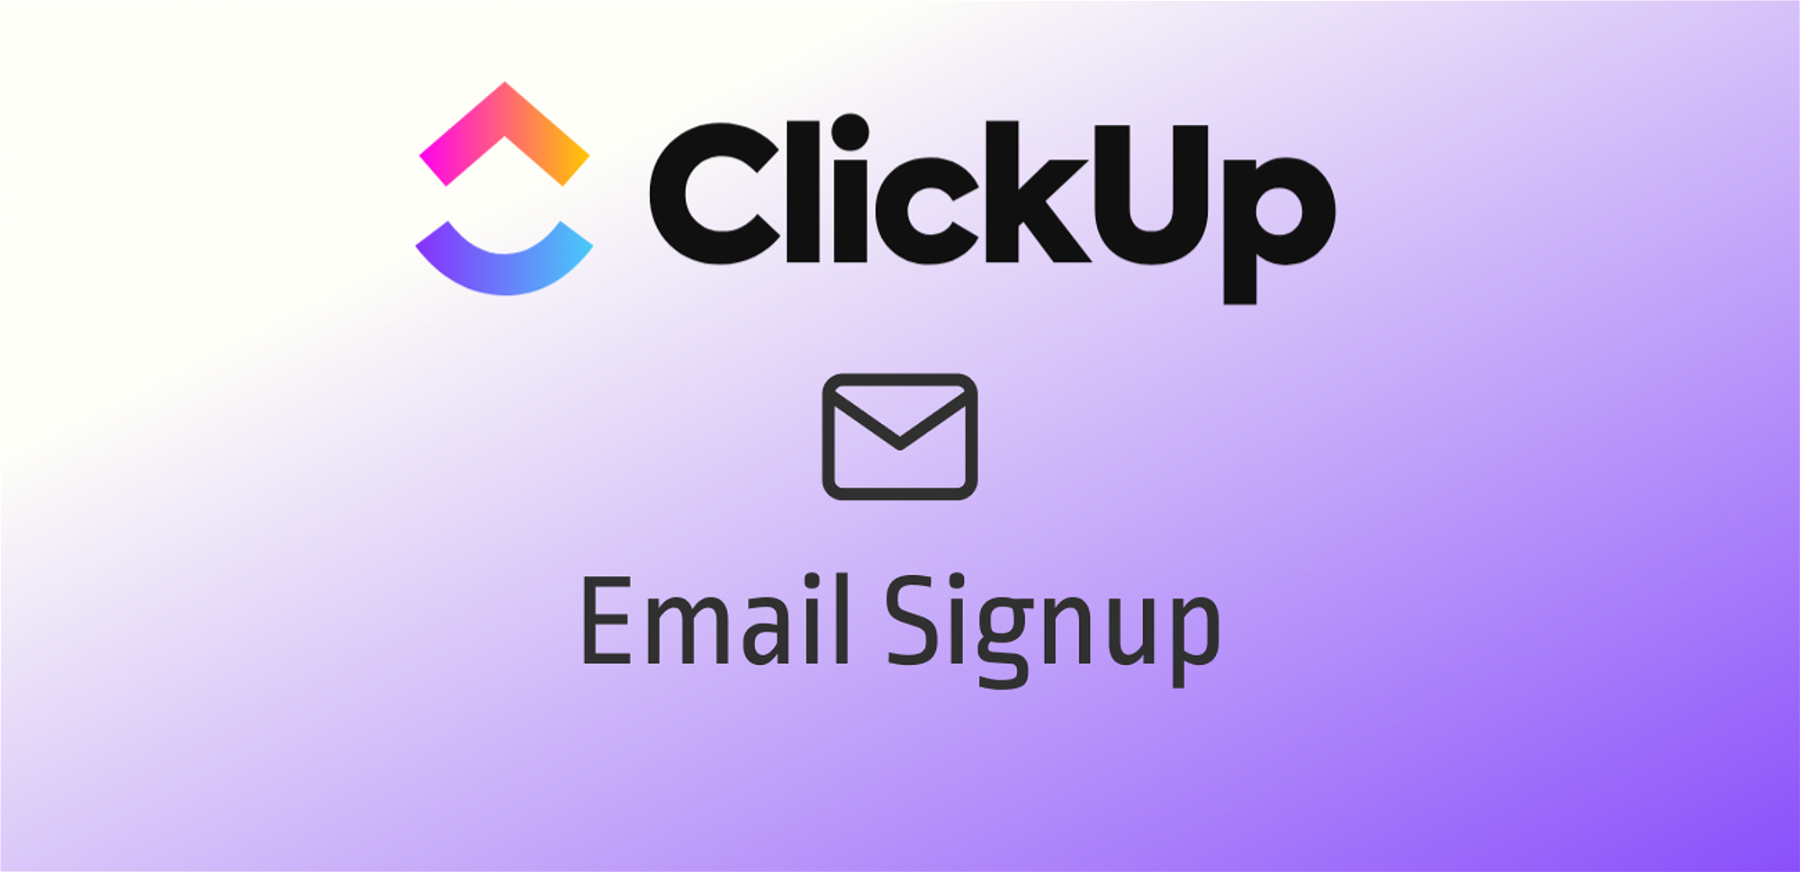 Add Email Signup to your ClickUp document